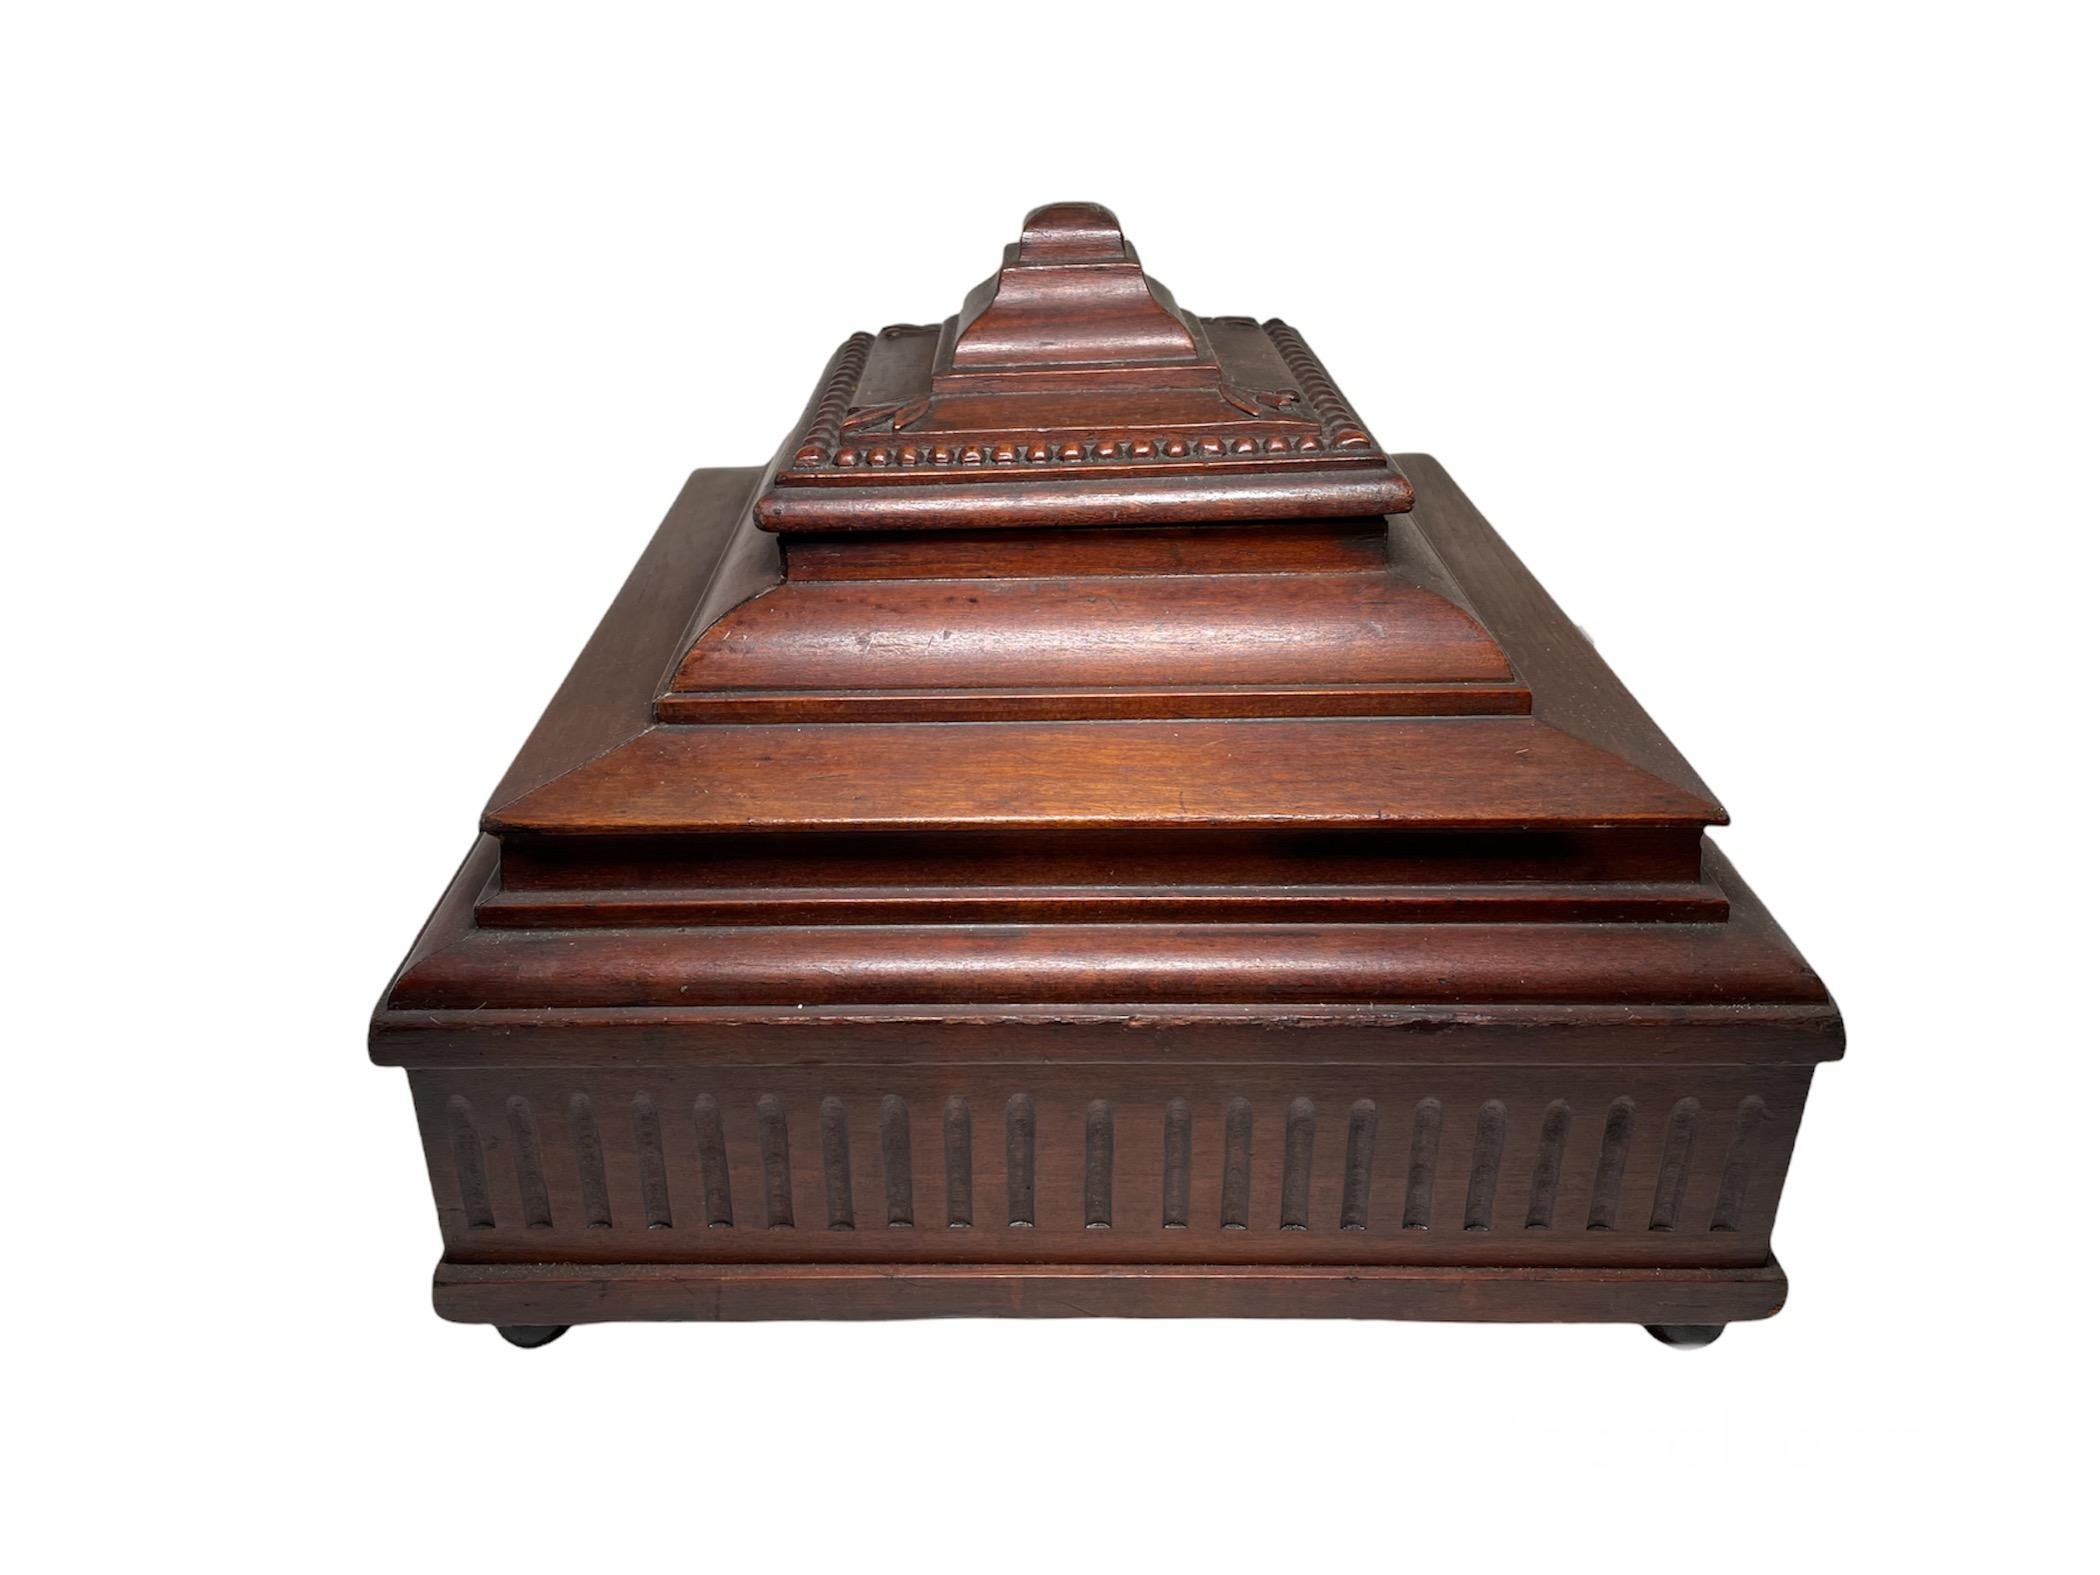 This is a cigar humidor wooden box shaped as a pagoda. The top of the lid is adorned with some relief of leaves in the corners and some beaded chain in its border. Also the wooden square bottom border has some fluted designs. The inside case has a